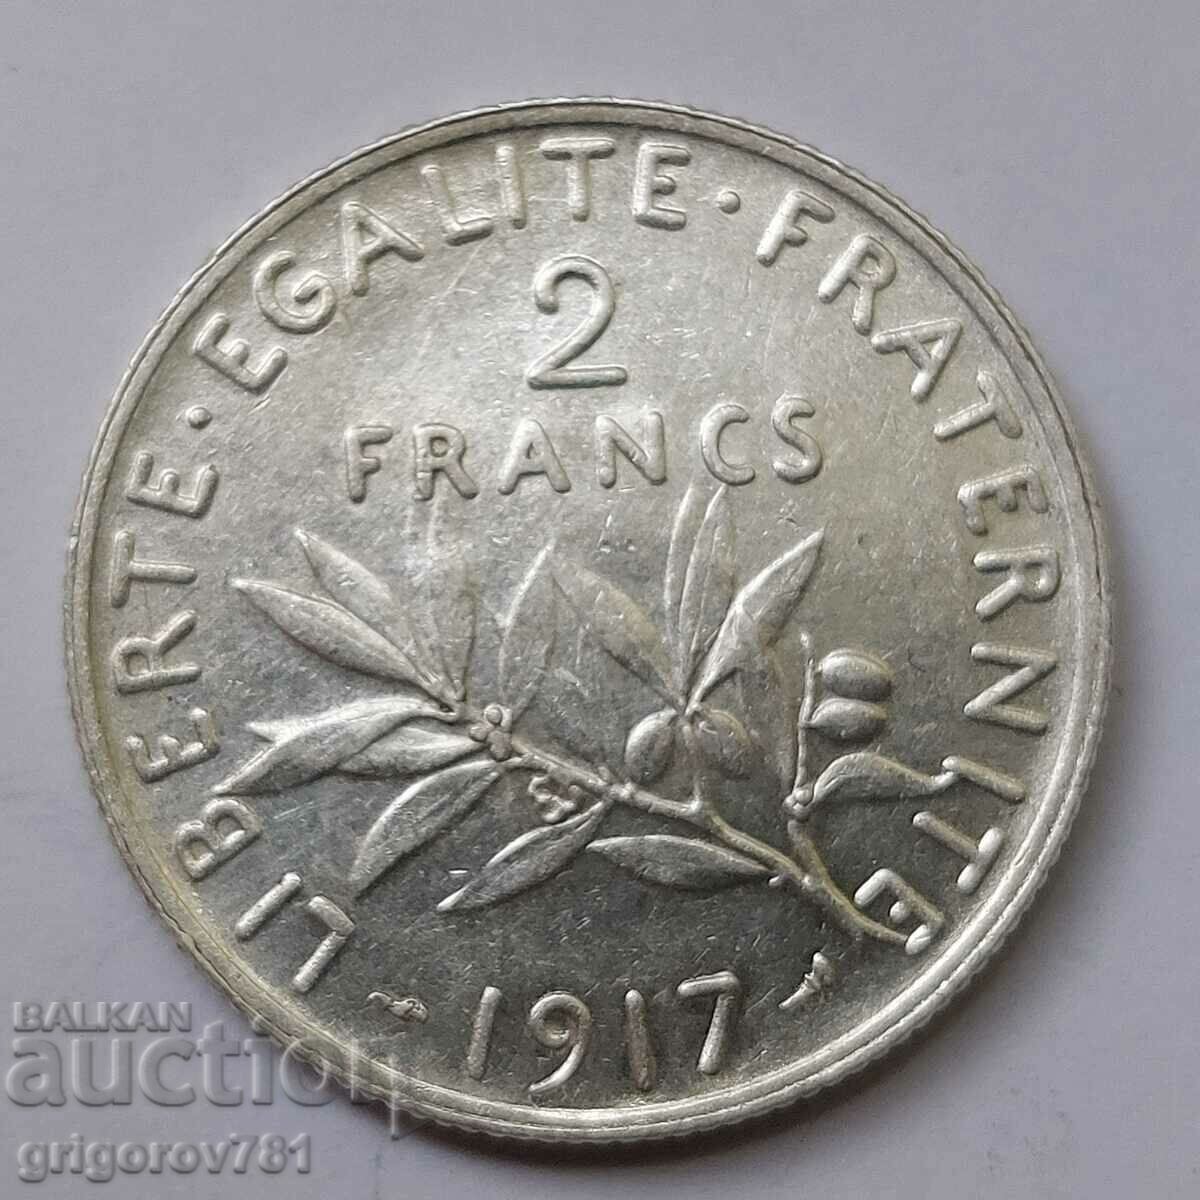 2 Francs Silver France 1917 - Silver Coin #49